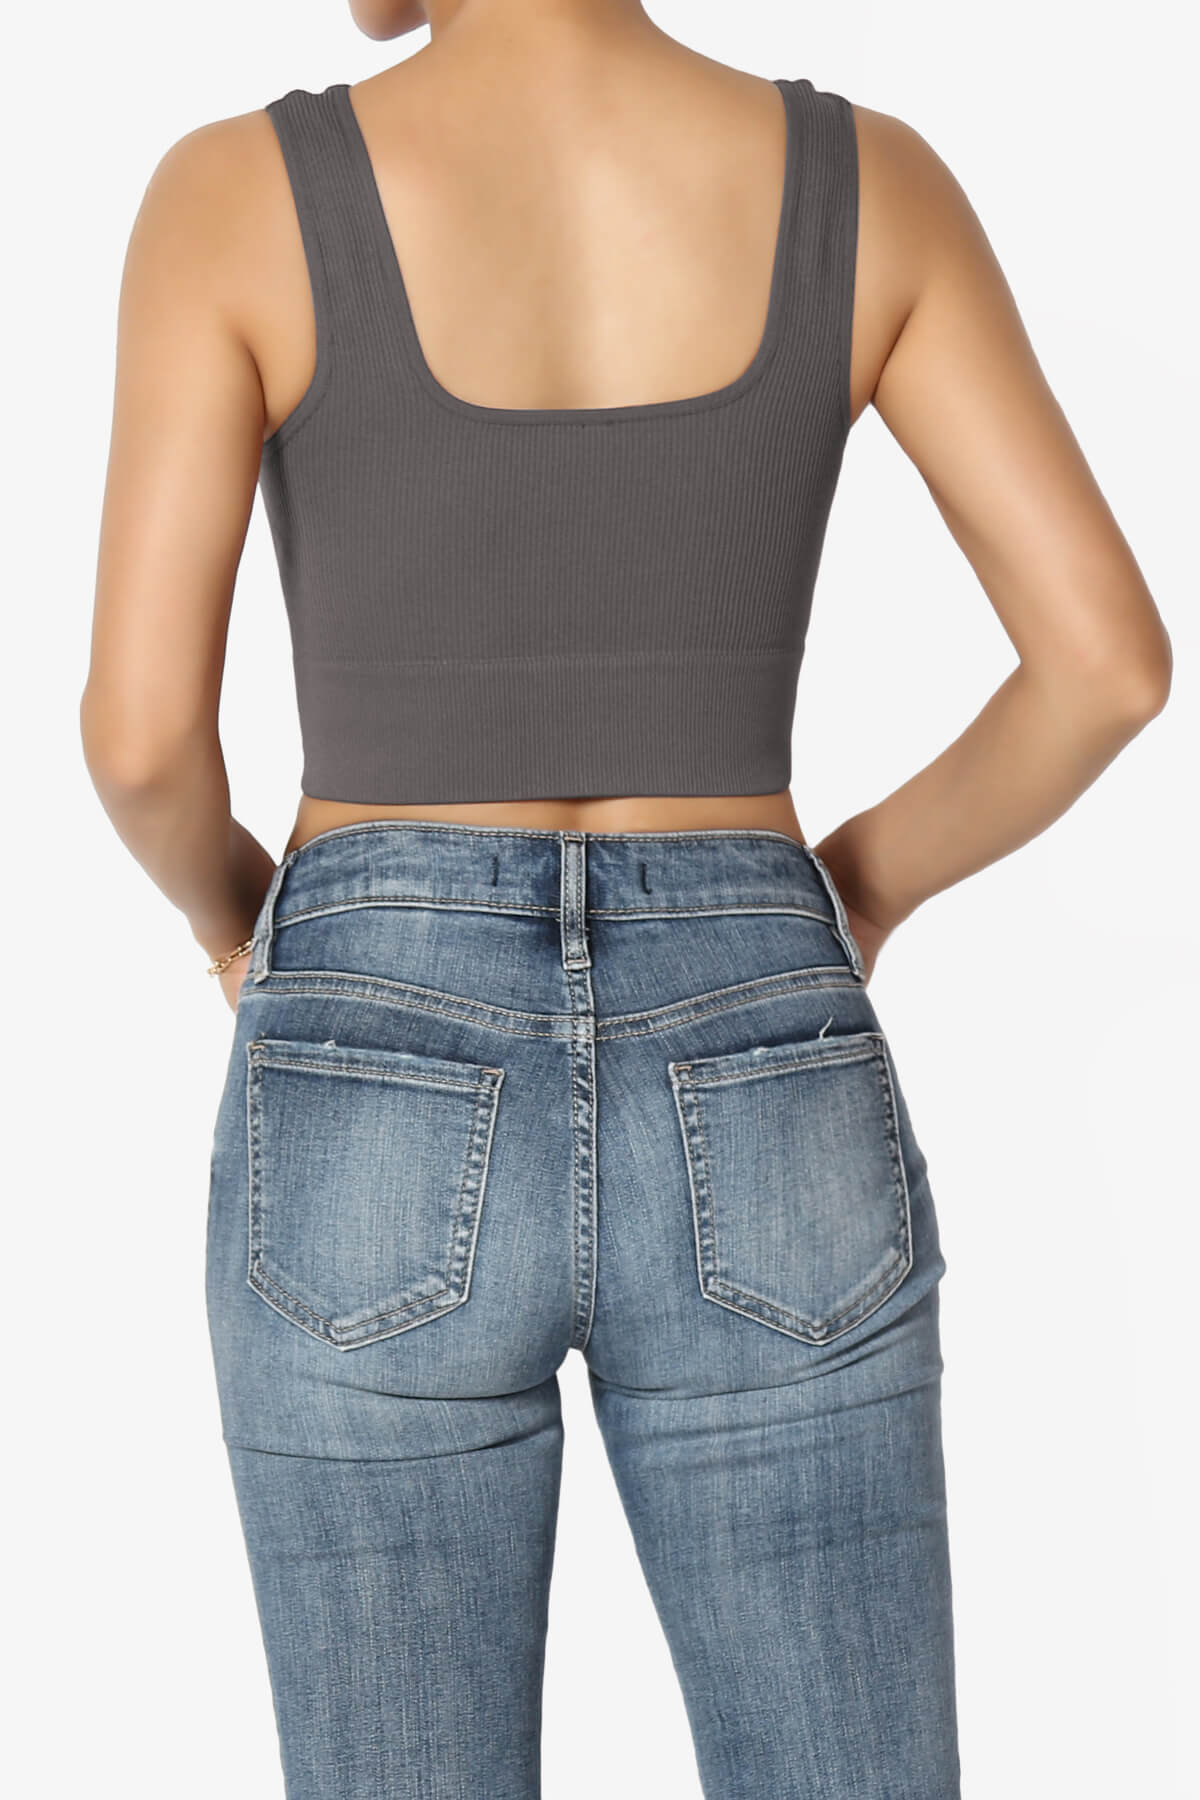 Hilde Ripped Seamless Square Neck Crop Tank Top ASH GREY_2